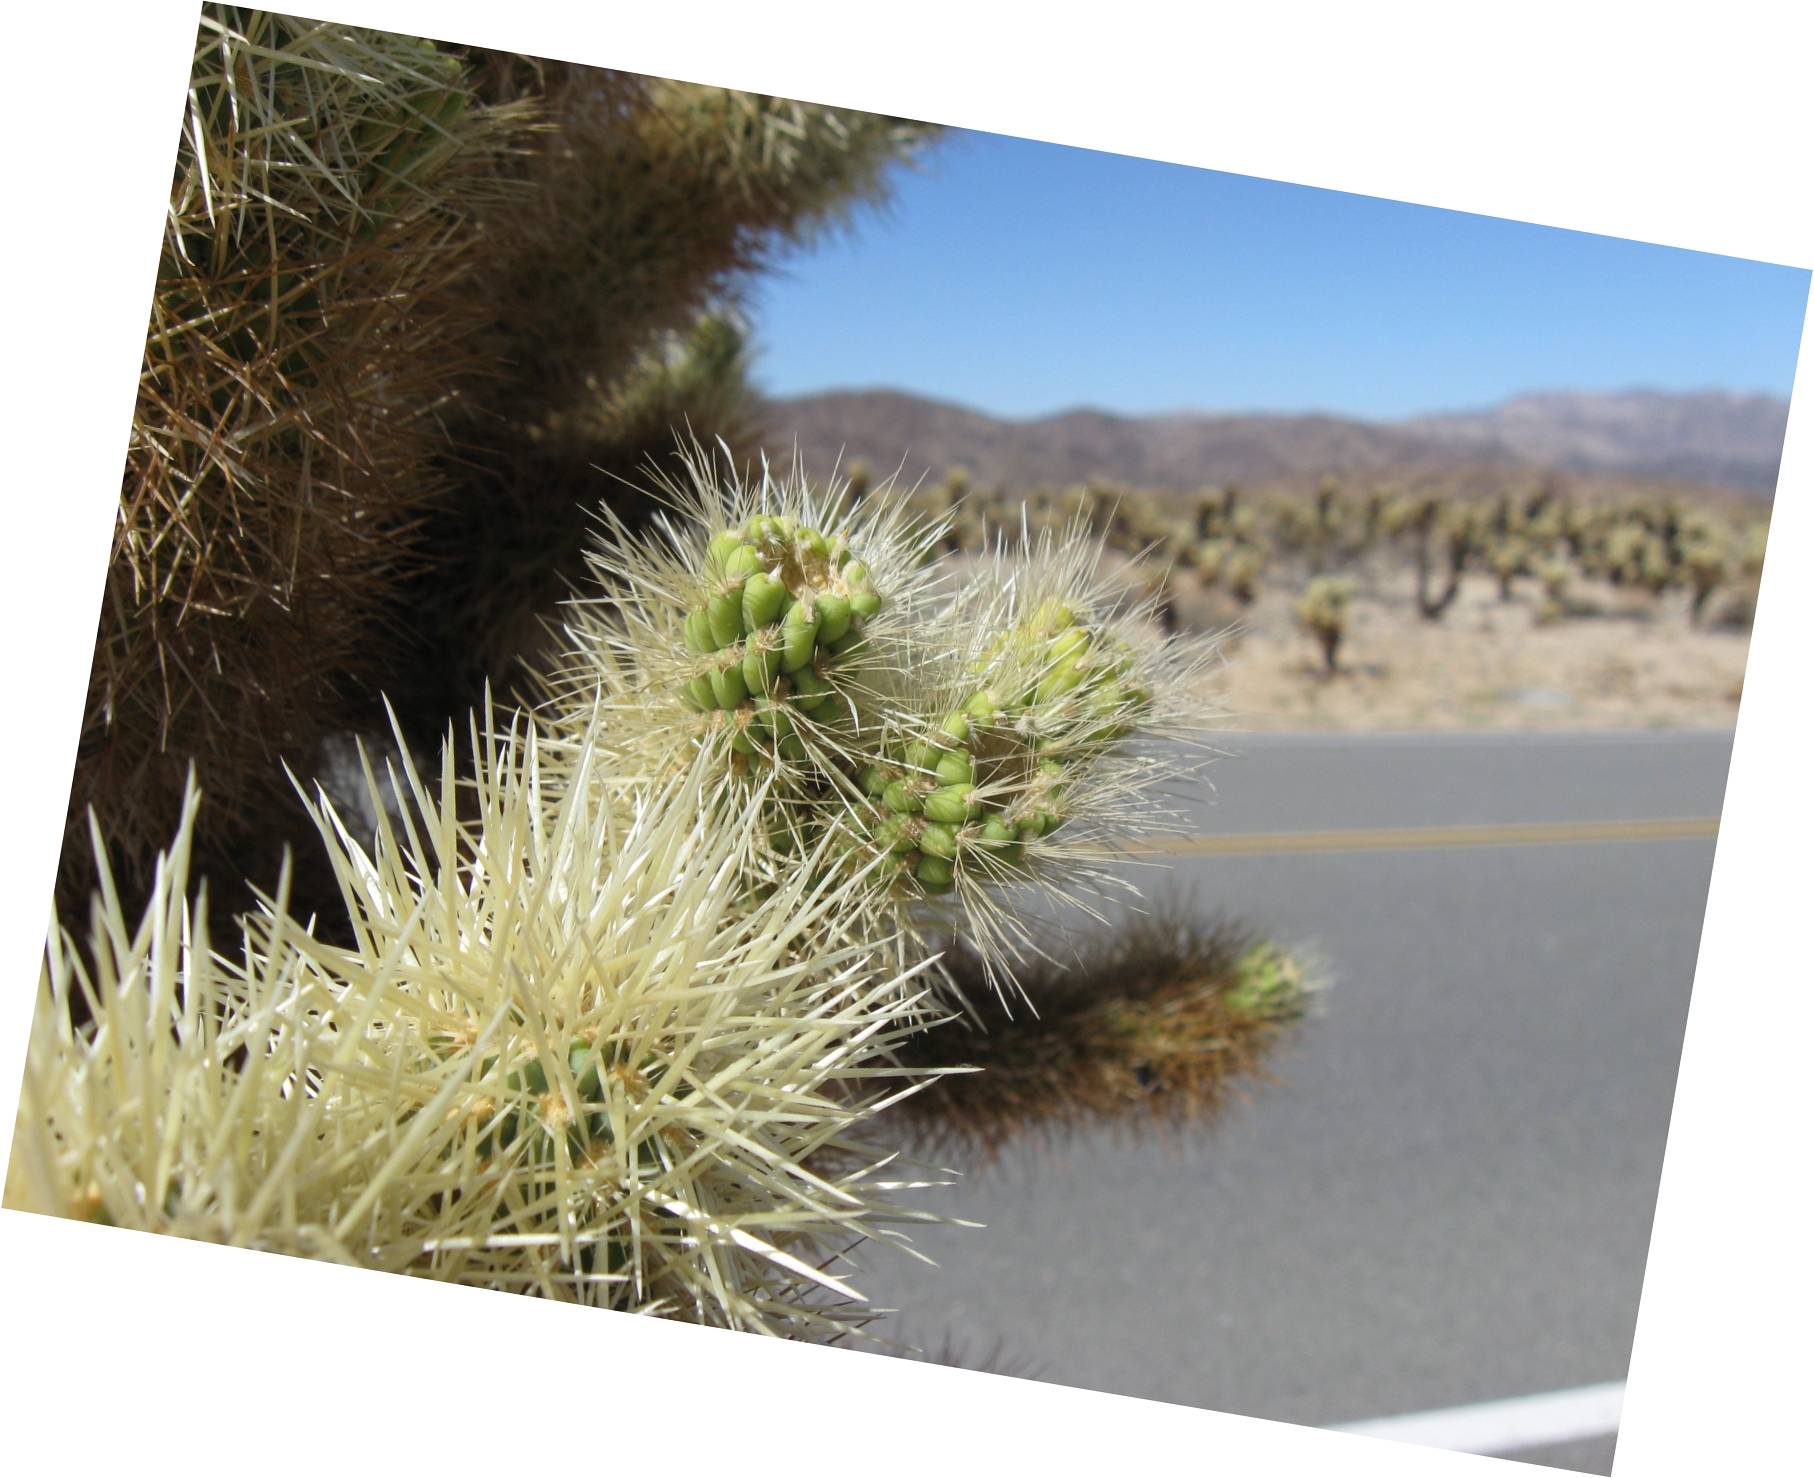 Image: The Jumping Cholla (aka the teddy bear) is prominent in the part of the national park that intersects the lower Colorado Desert